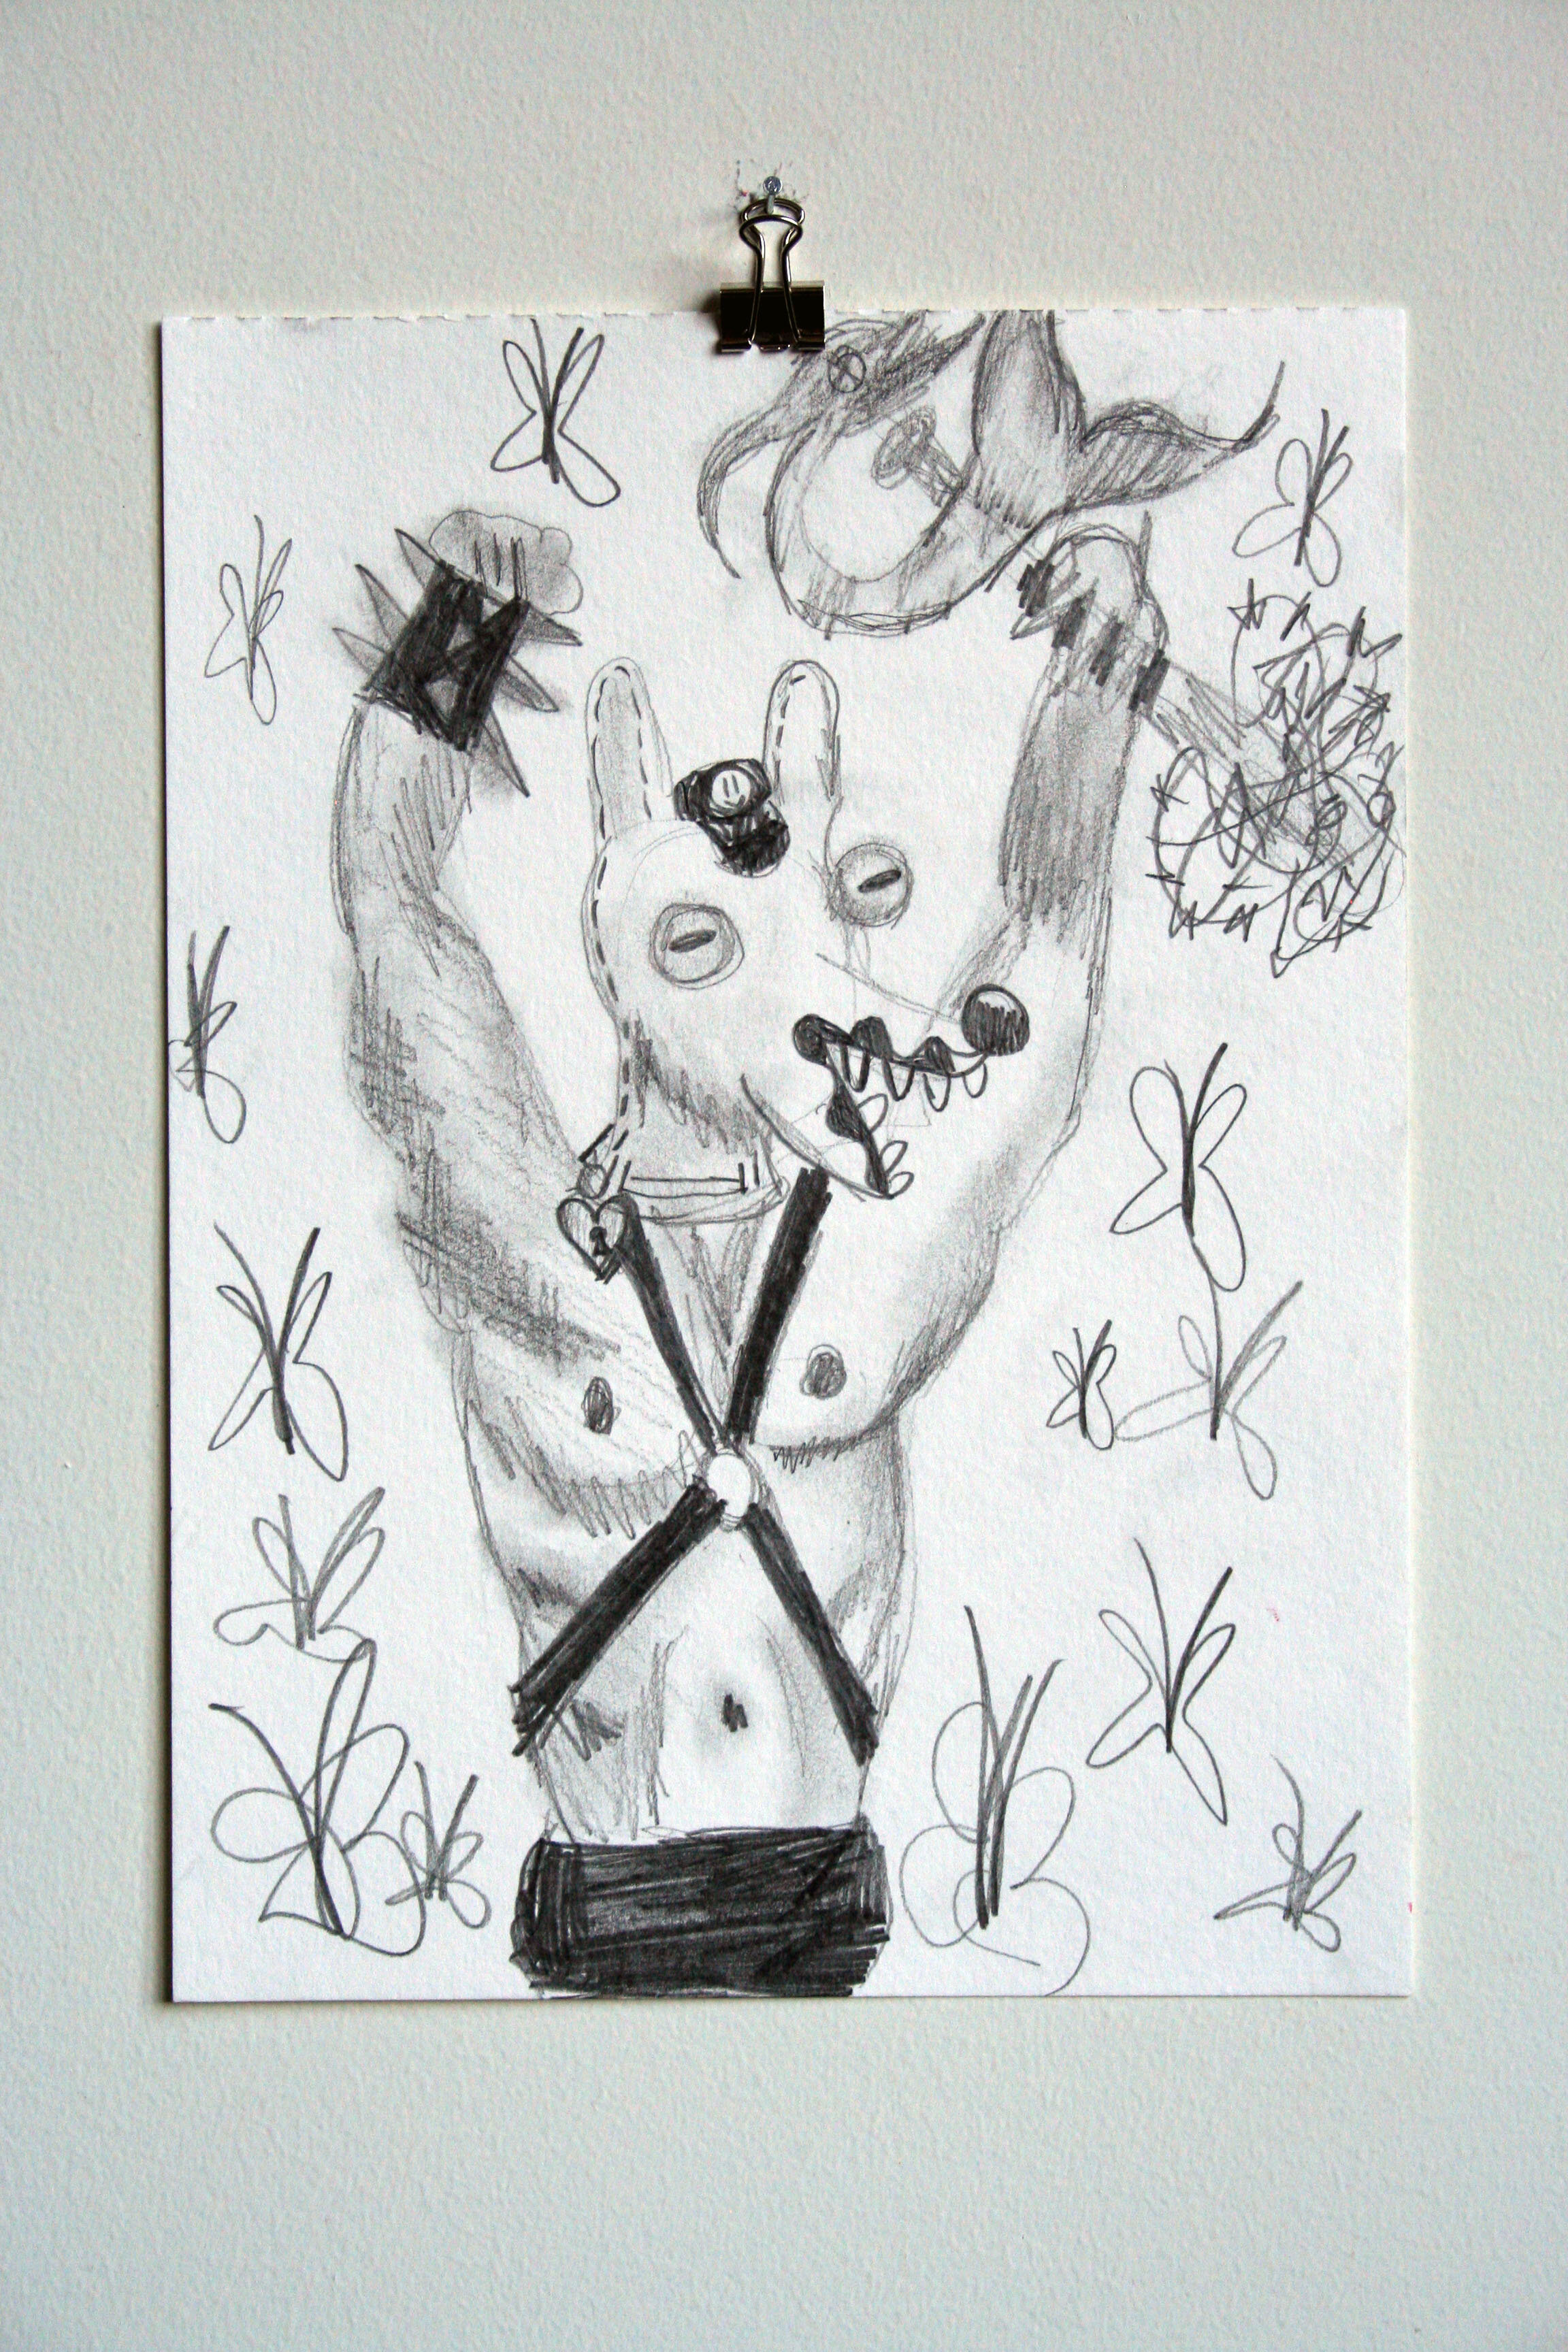   OG Bobby Dolphin and His Fantasy Murder Ax , 2015  12 x 9 inches (30.48 x 22.86 cm.)  Graphite on paper 